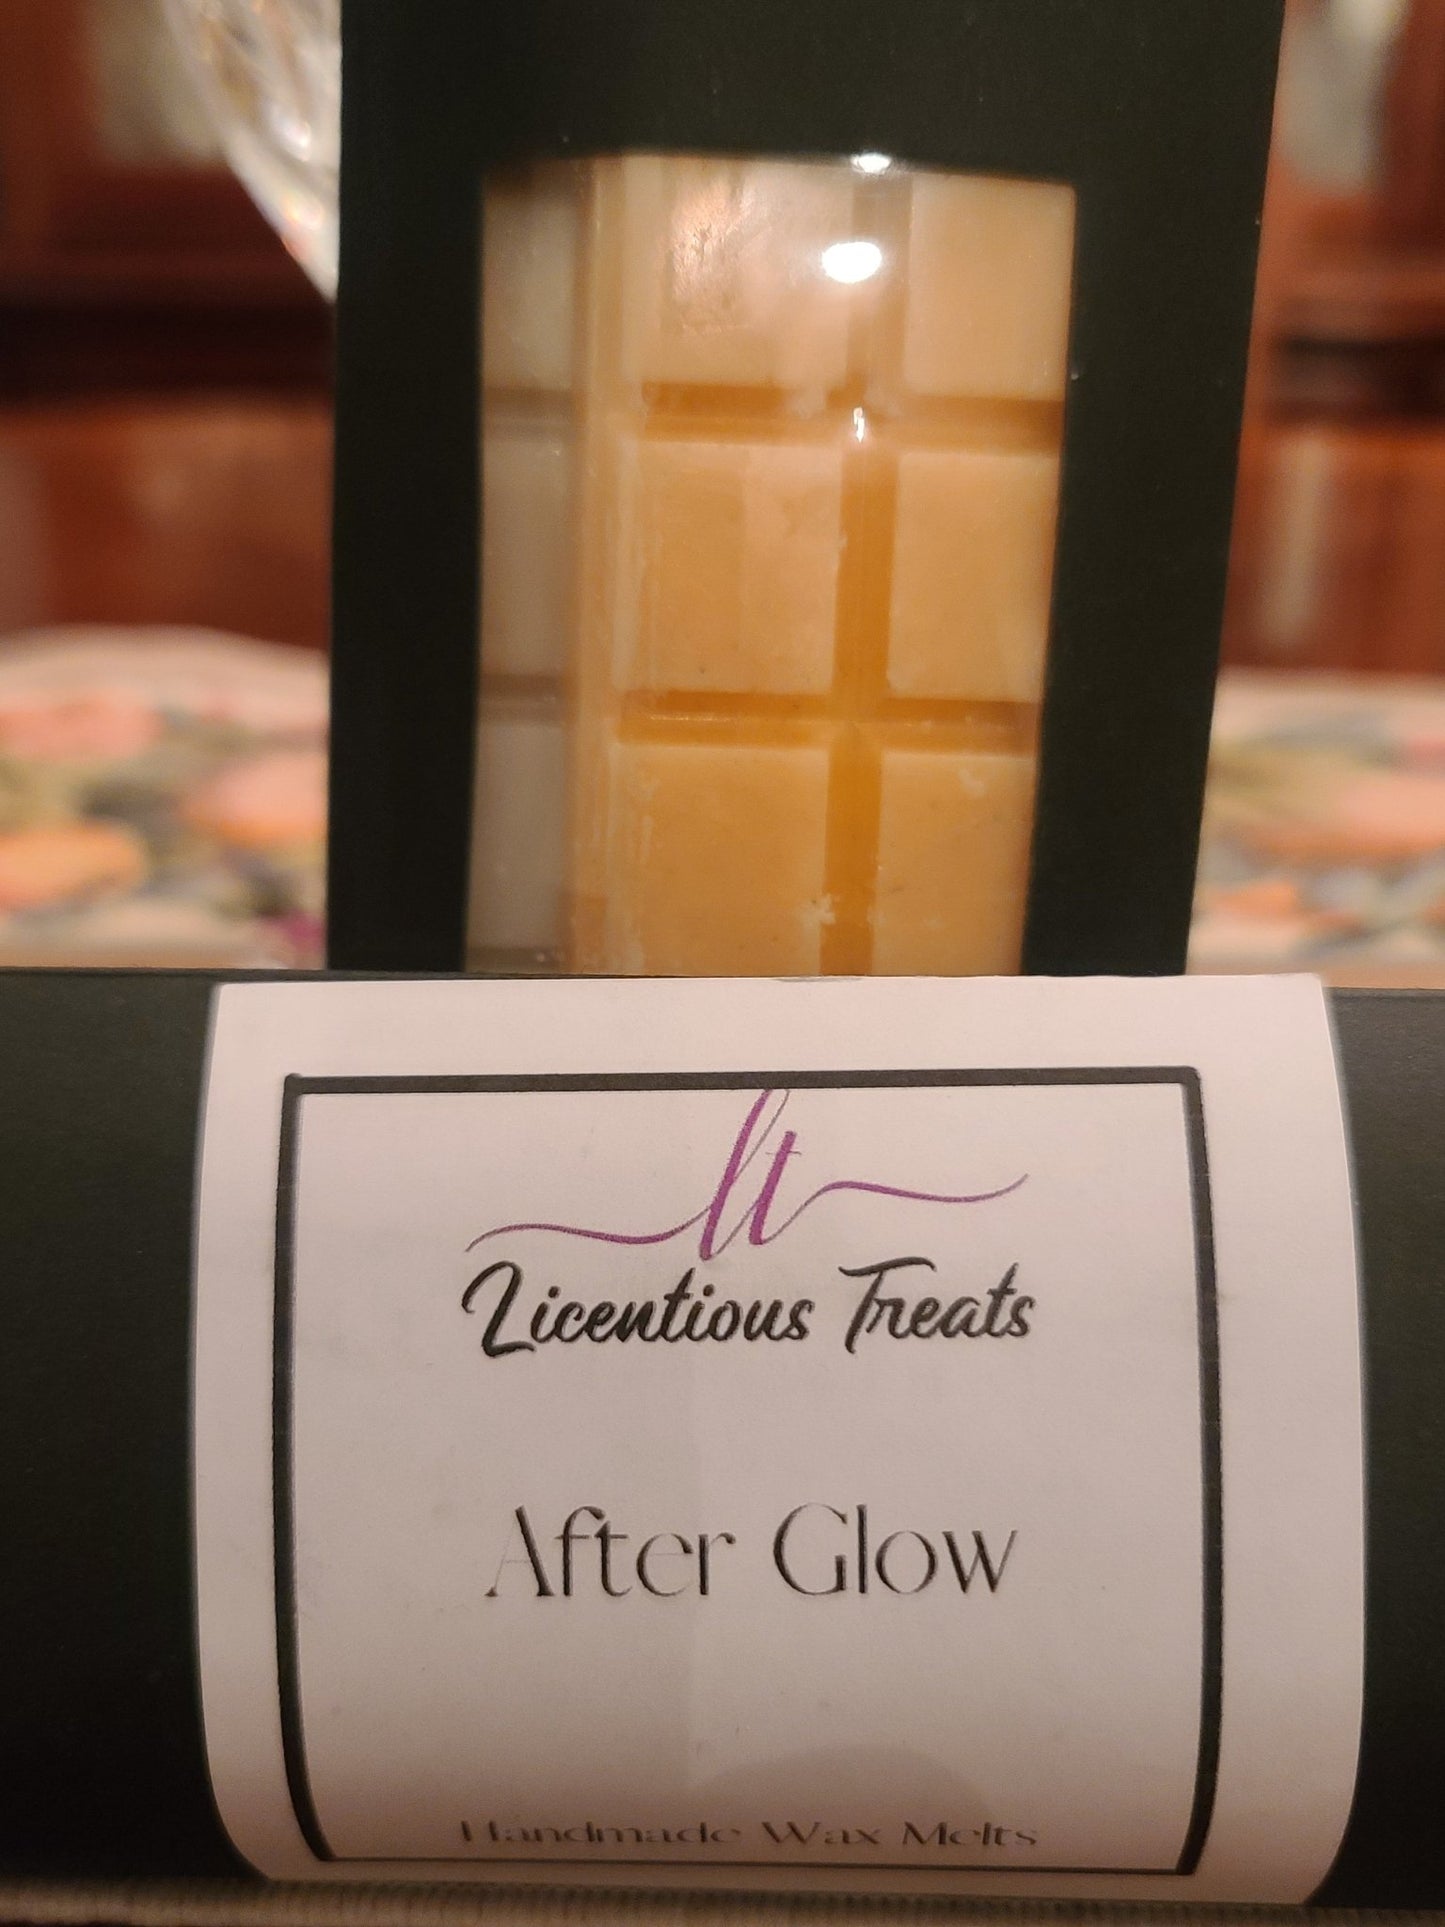 Wax Melts - After Glow - Licentious TreatsWax Melts - After Glow